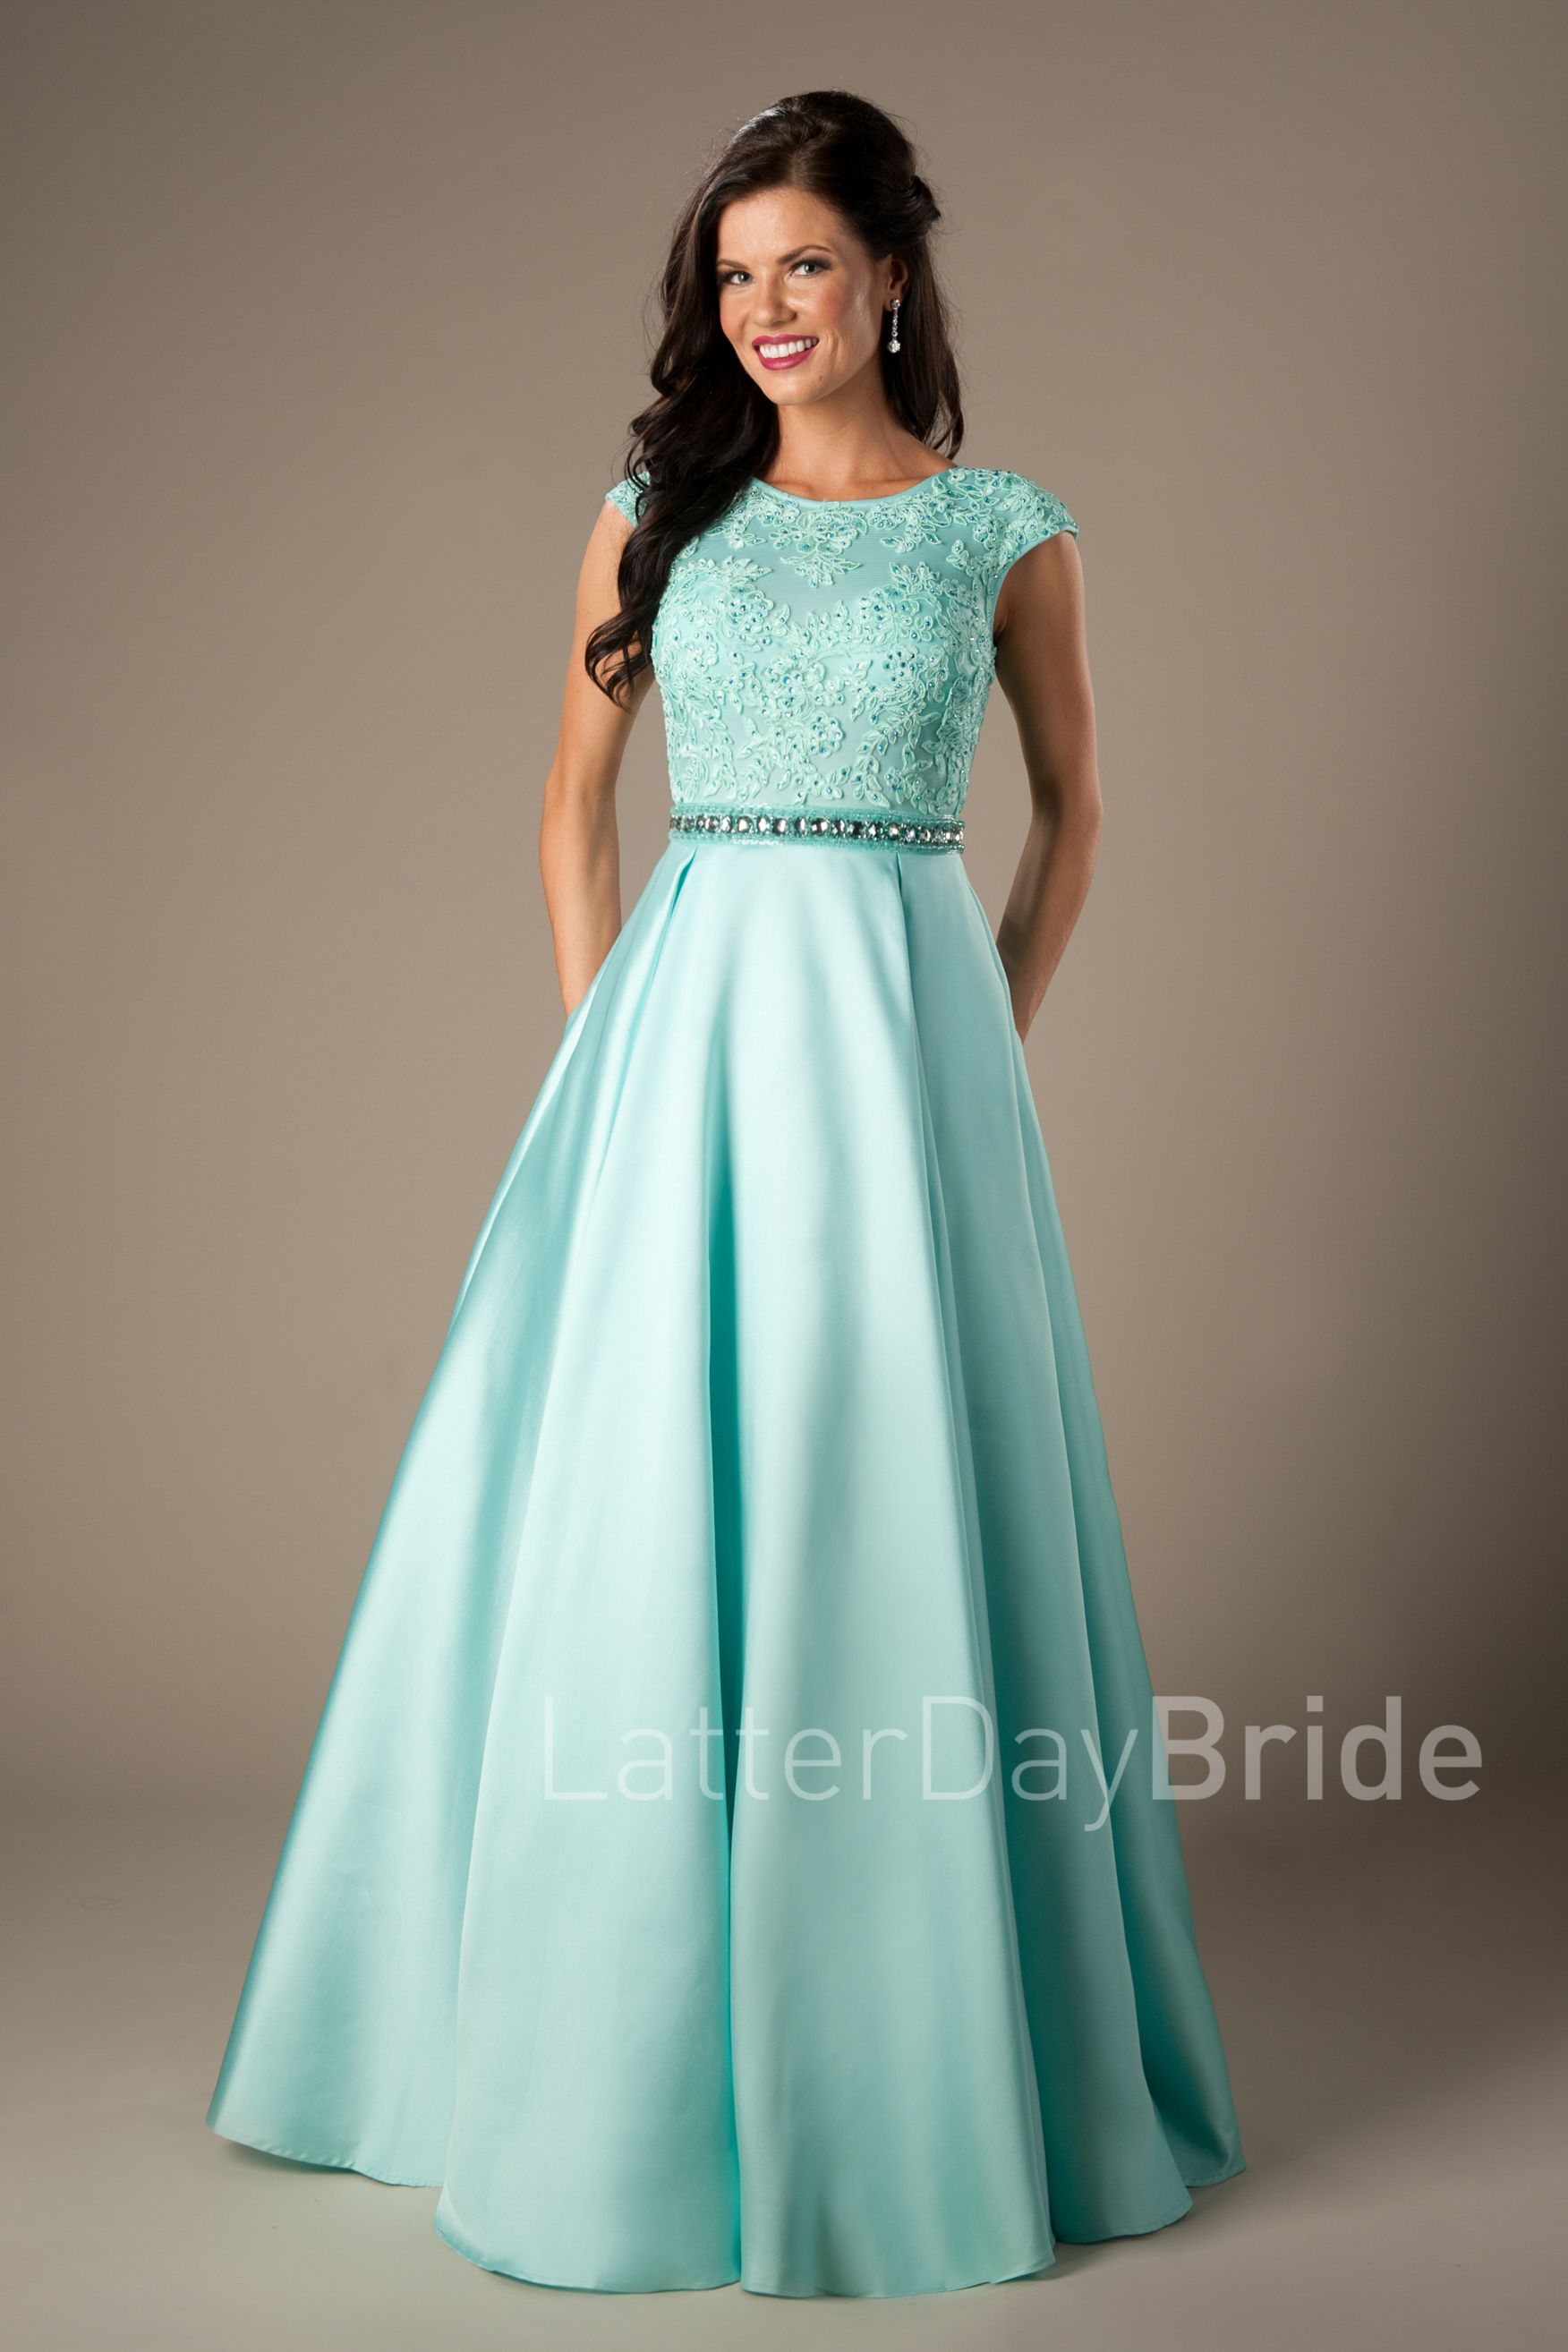 Long Modest Prom Dresses Top Sellers ...